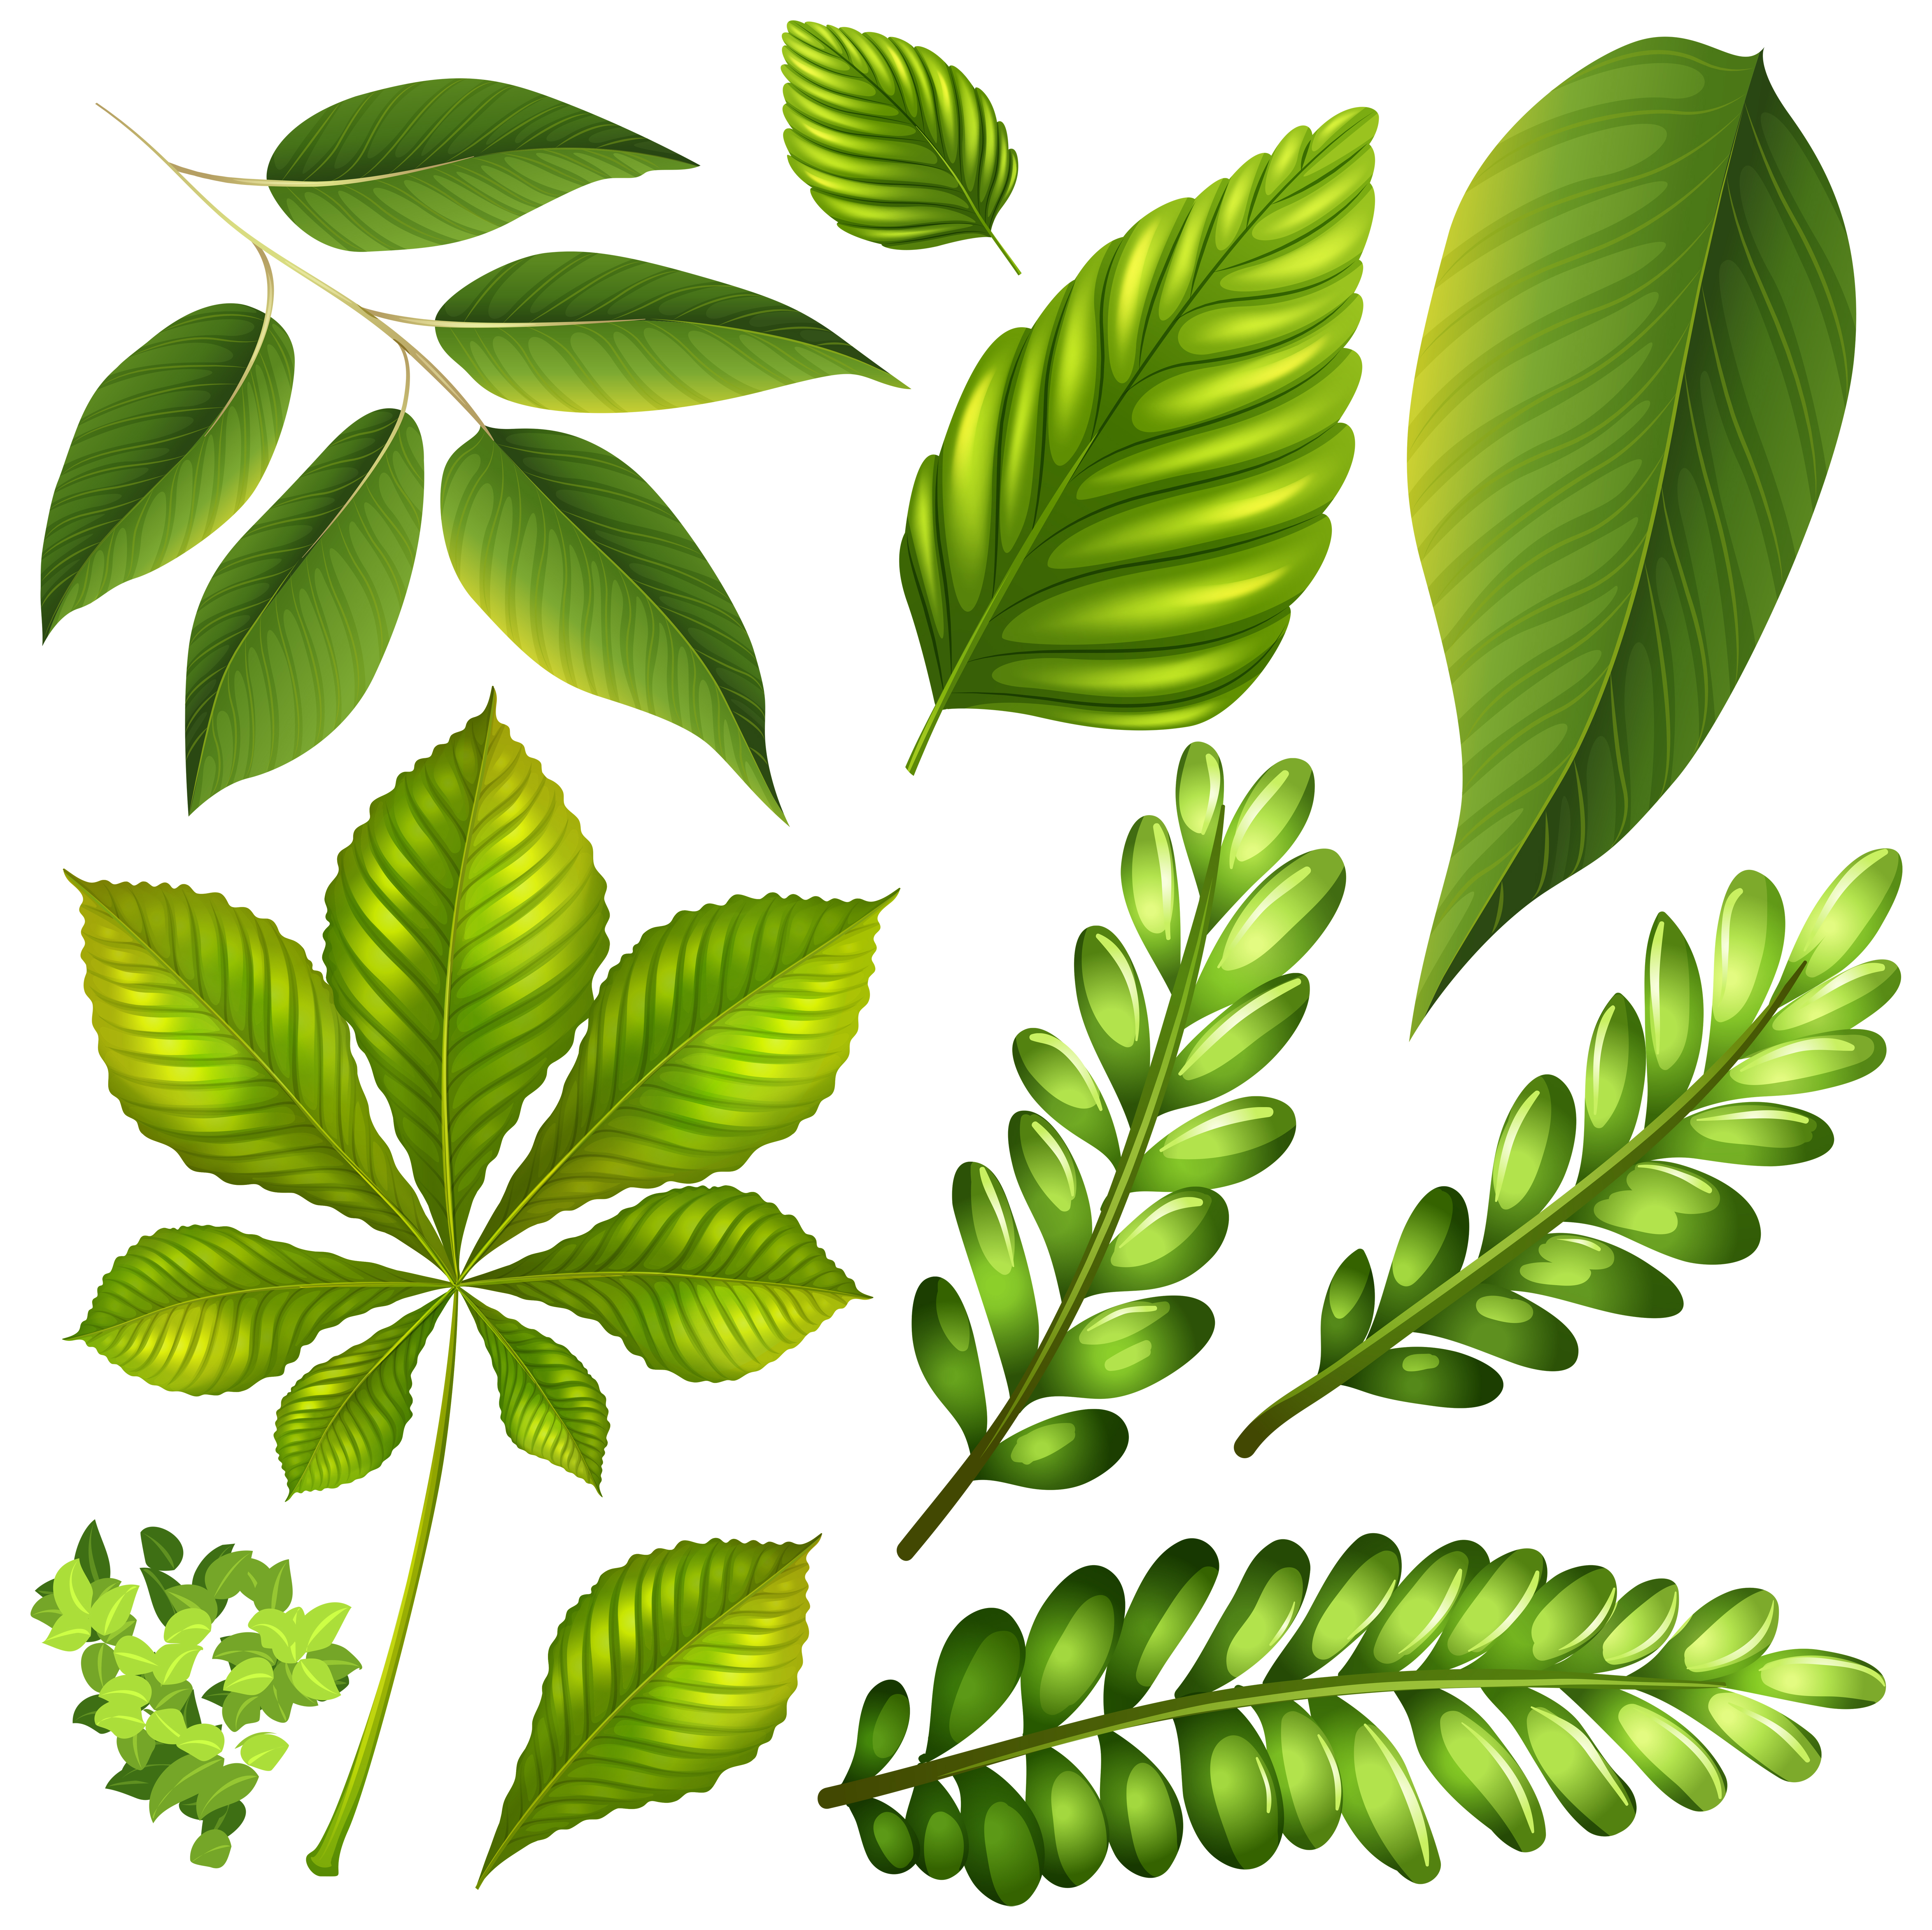 Different kind of leaves 298266 - Download Free Vectors, Clipart